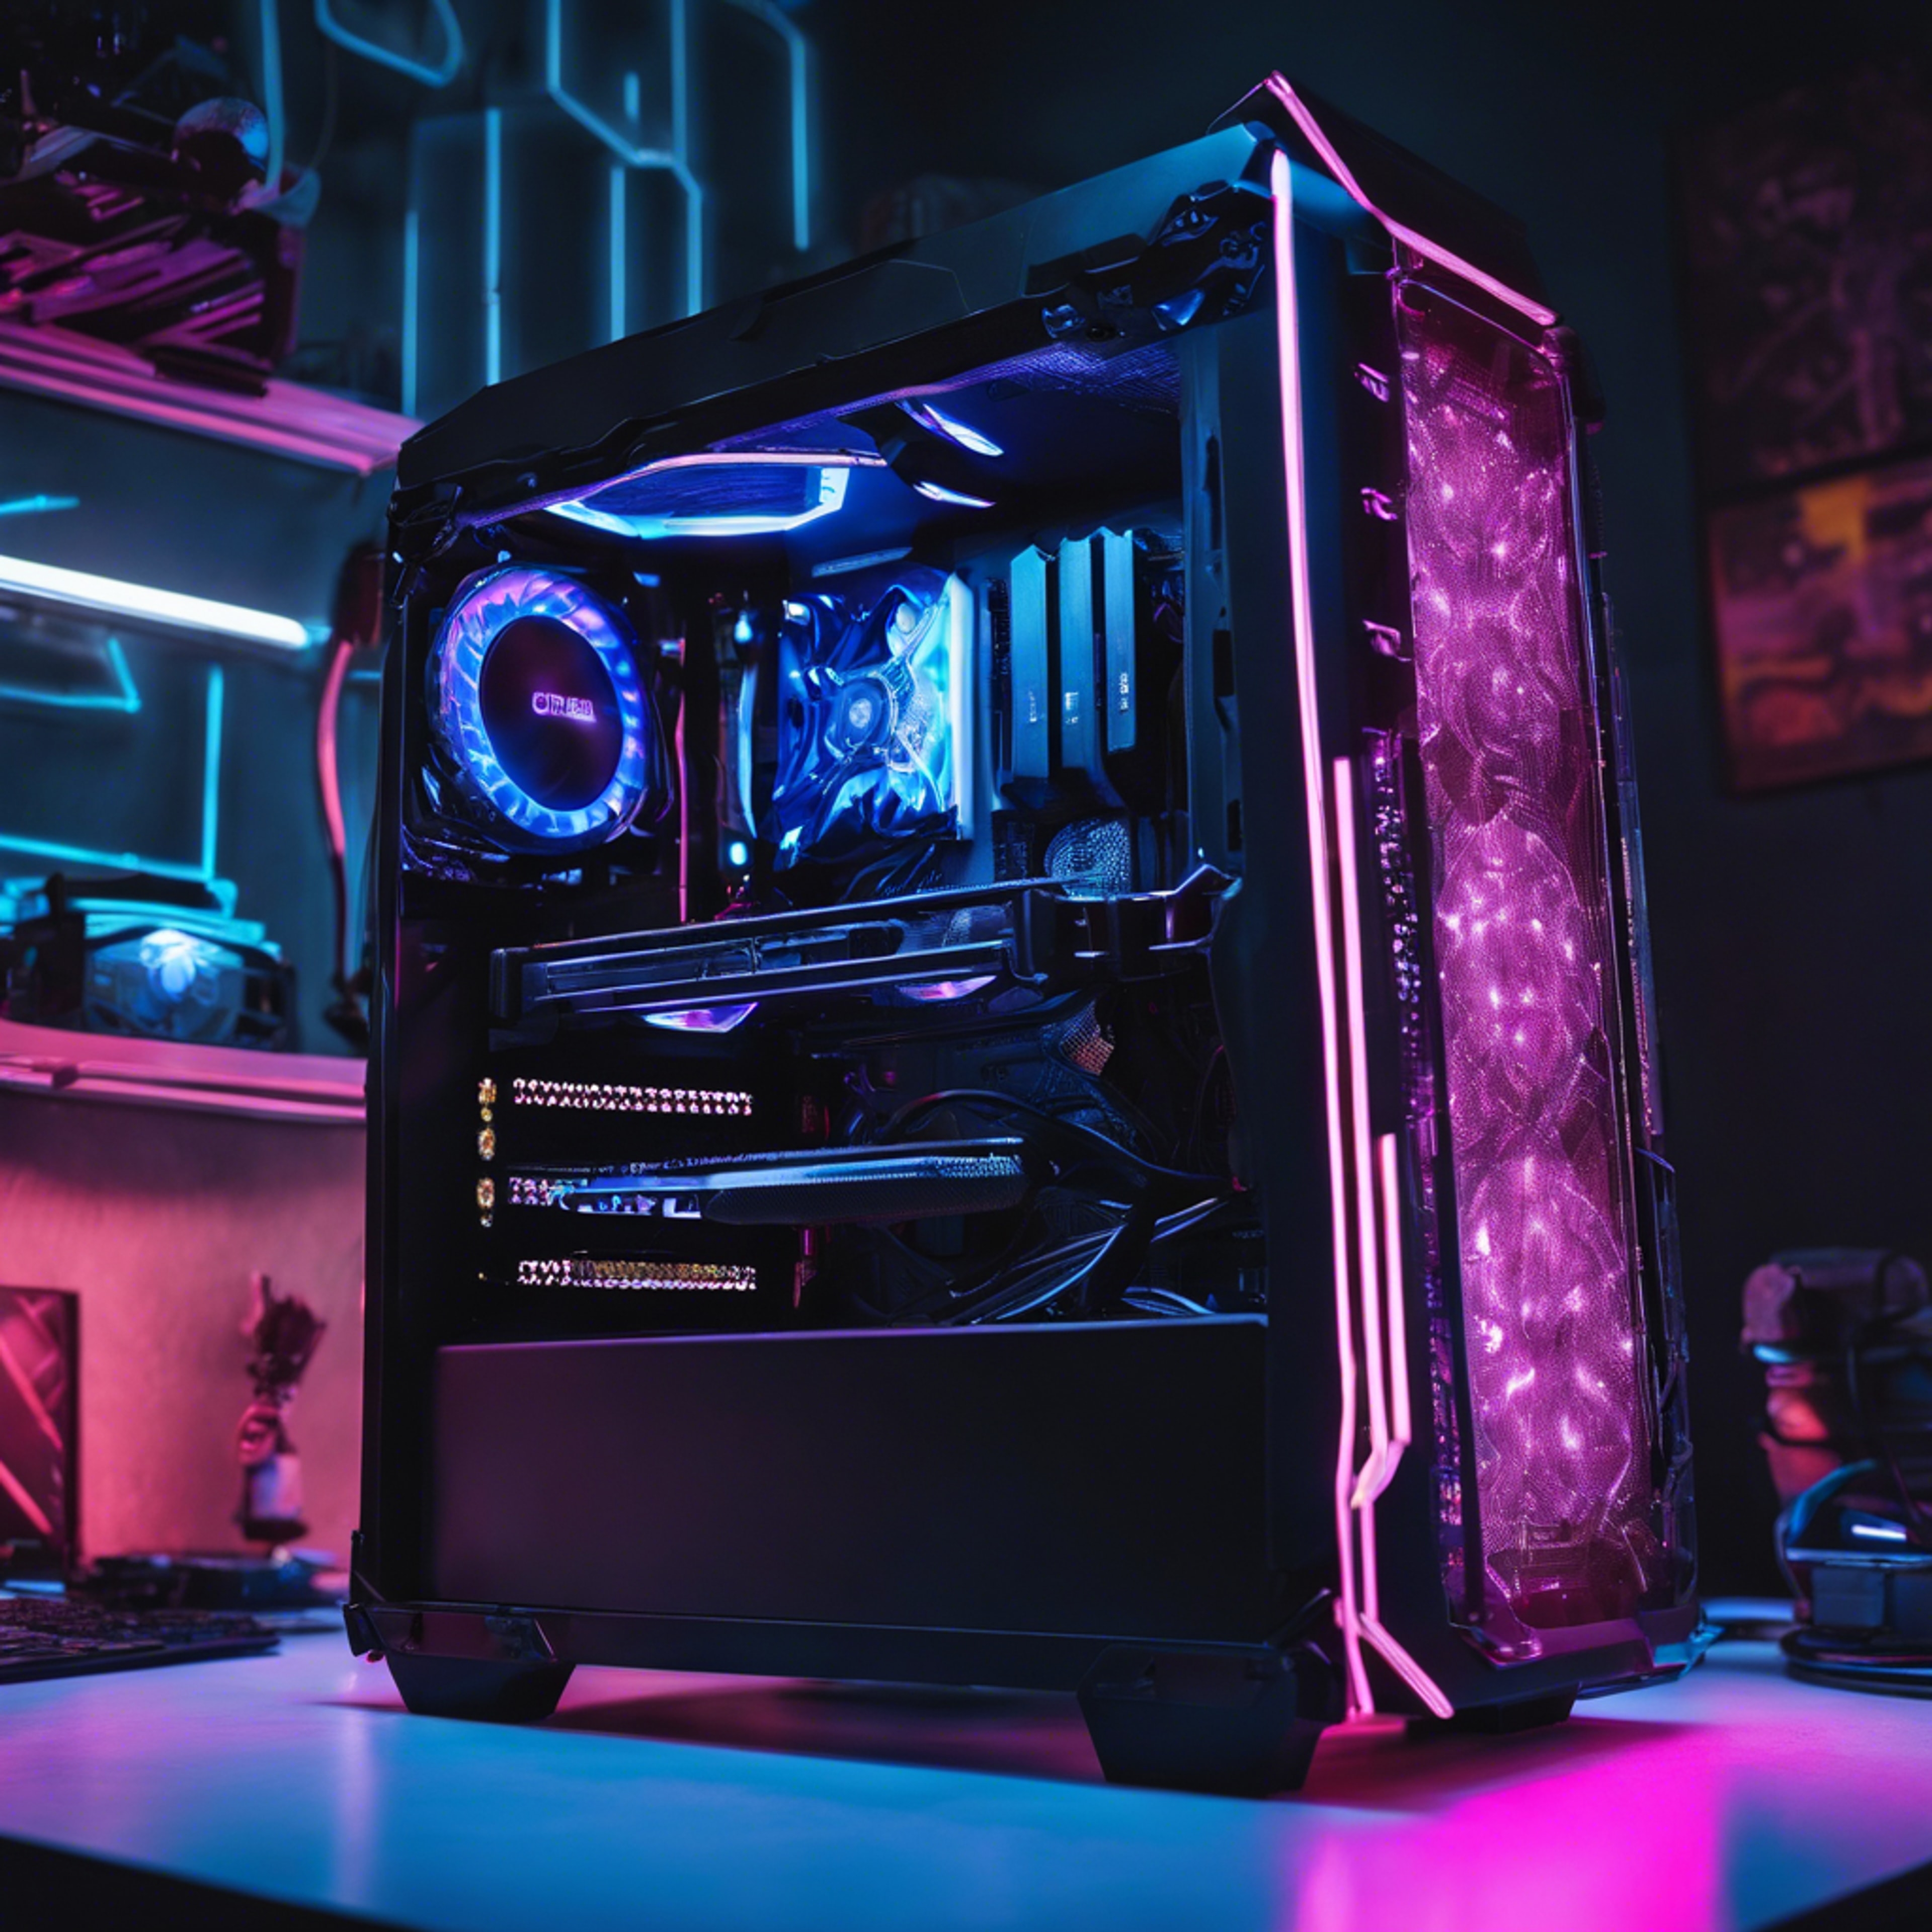 A cyberpunk-style black gaming PC with neon blue LED lights. Tapet[4f1d7ee7161d4e2894f4]